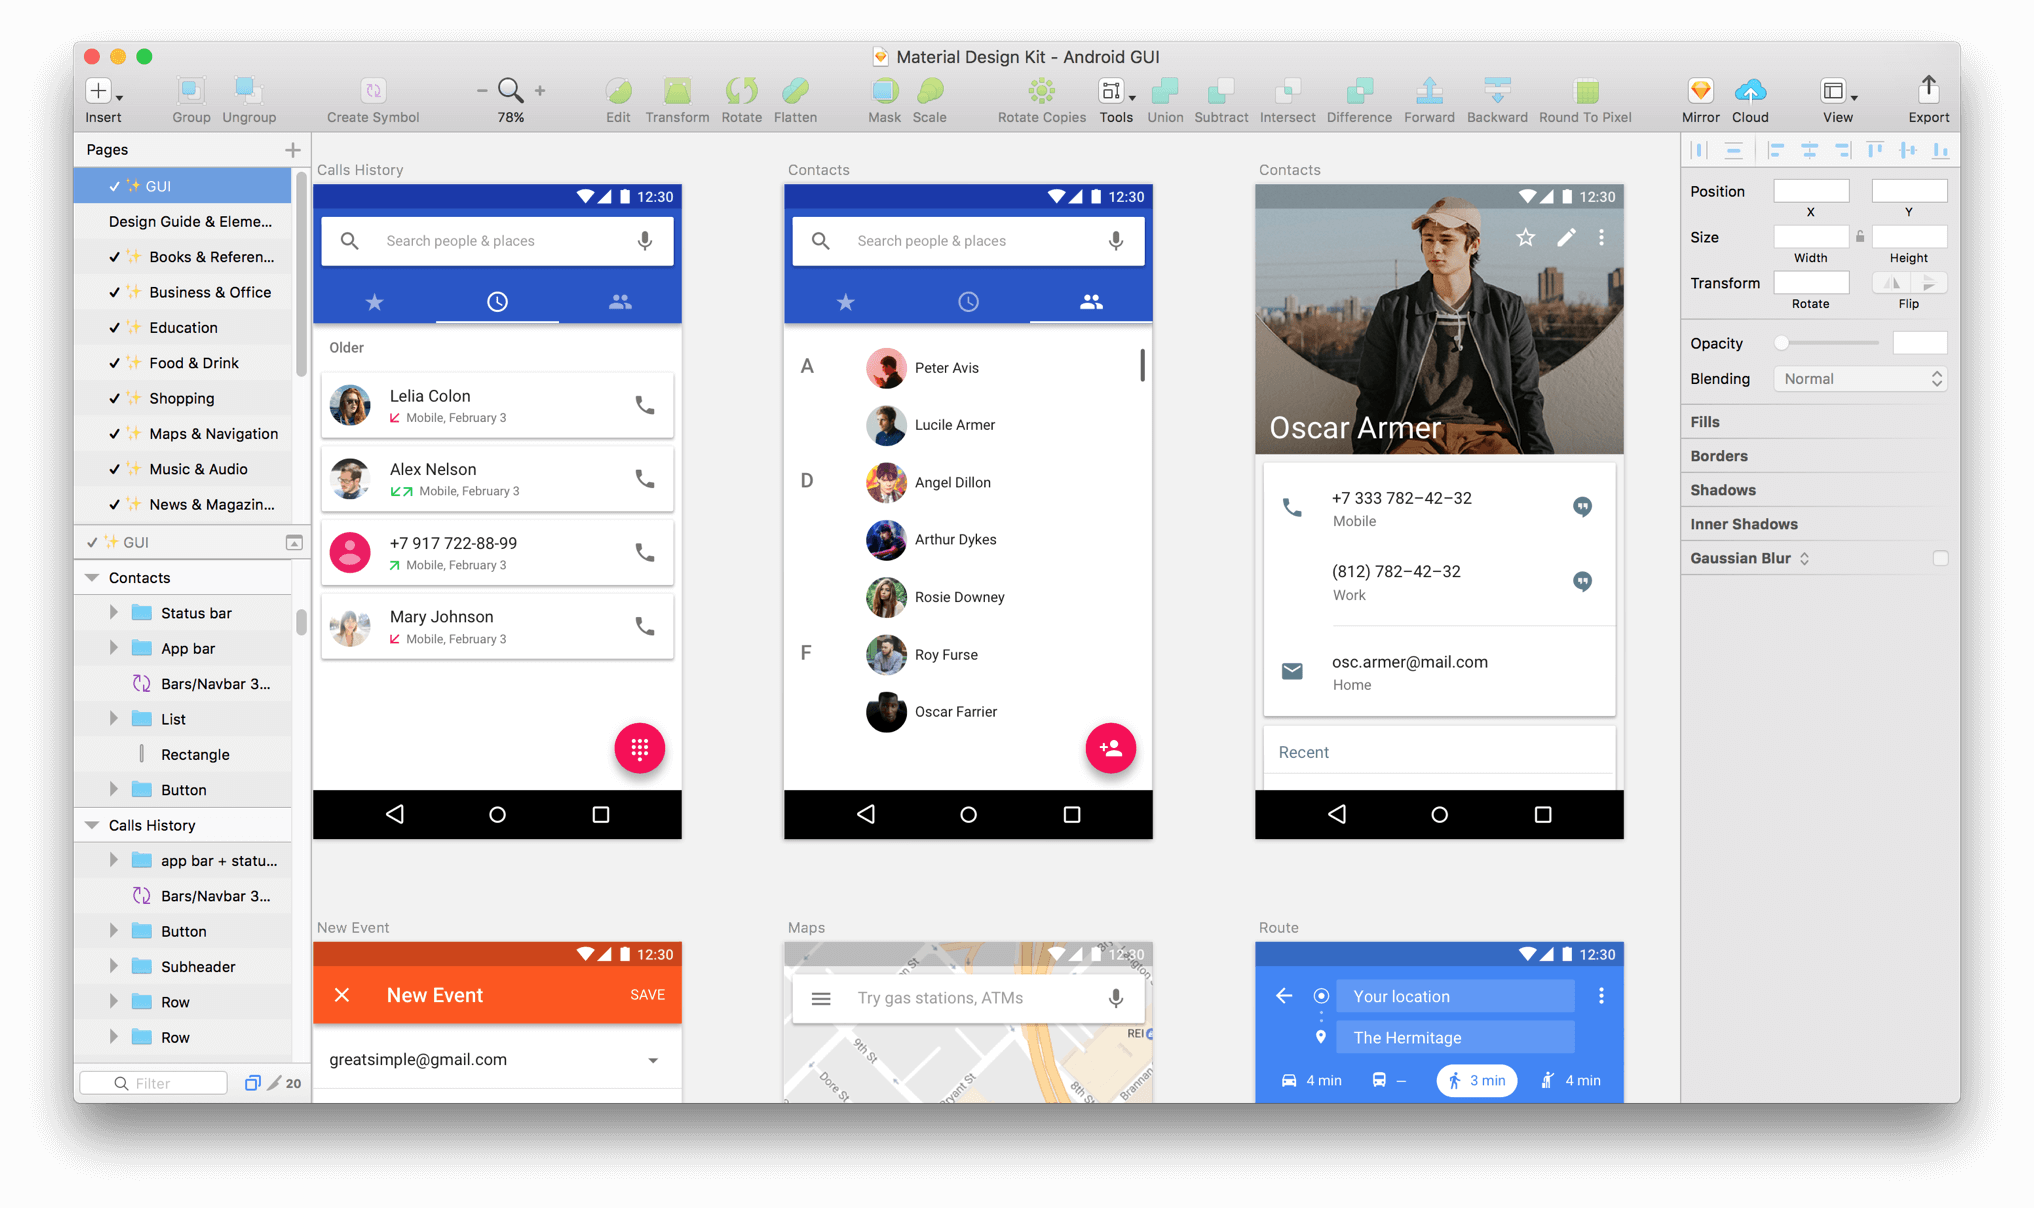 Android Gui Material Design Kit